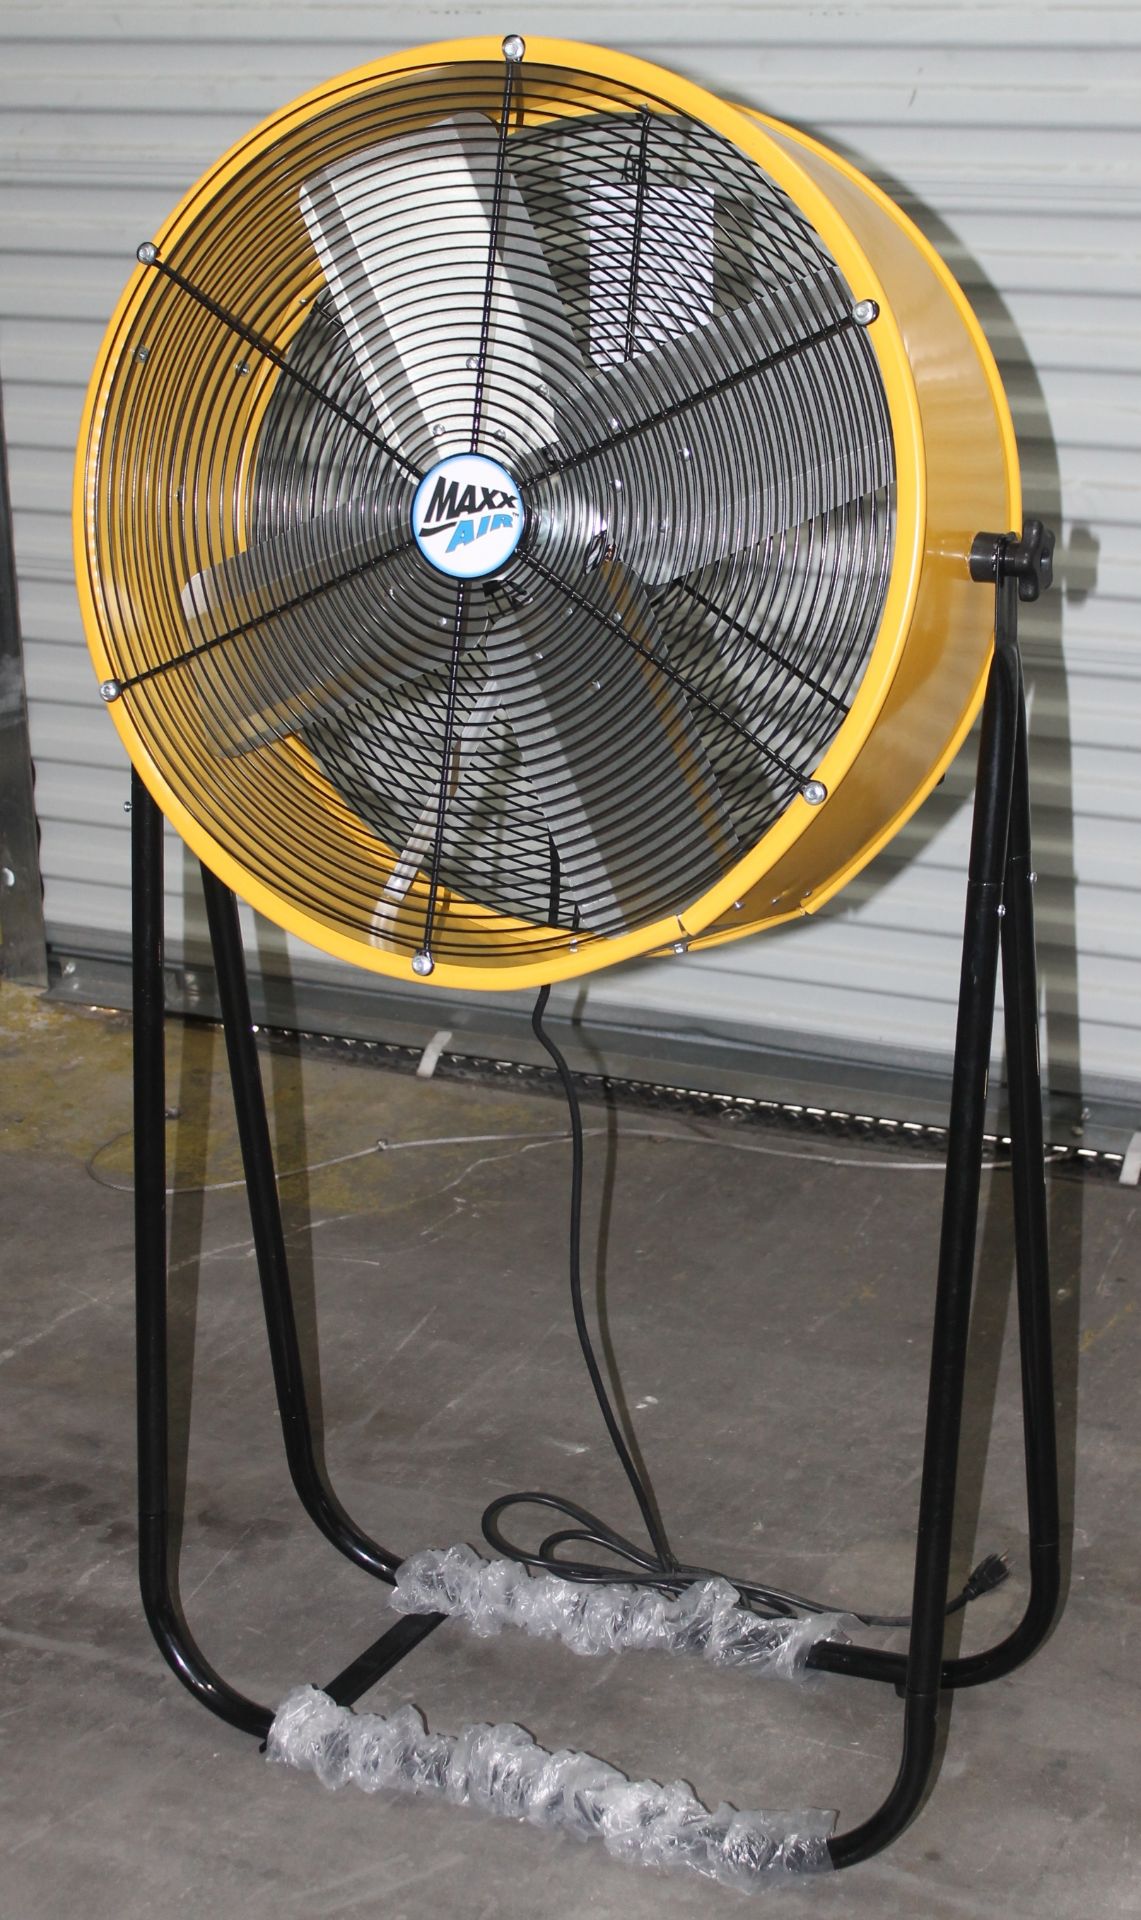 MAX AIR 24" 2 IN 1 TILT FAN,  MODEL: BF24TF2N1, CONVERTS FROM A ROLL AROUND FLOOR FAN TO A 52" STAND - Image 2 of 6